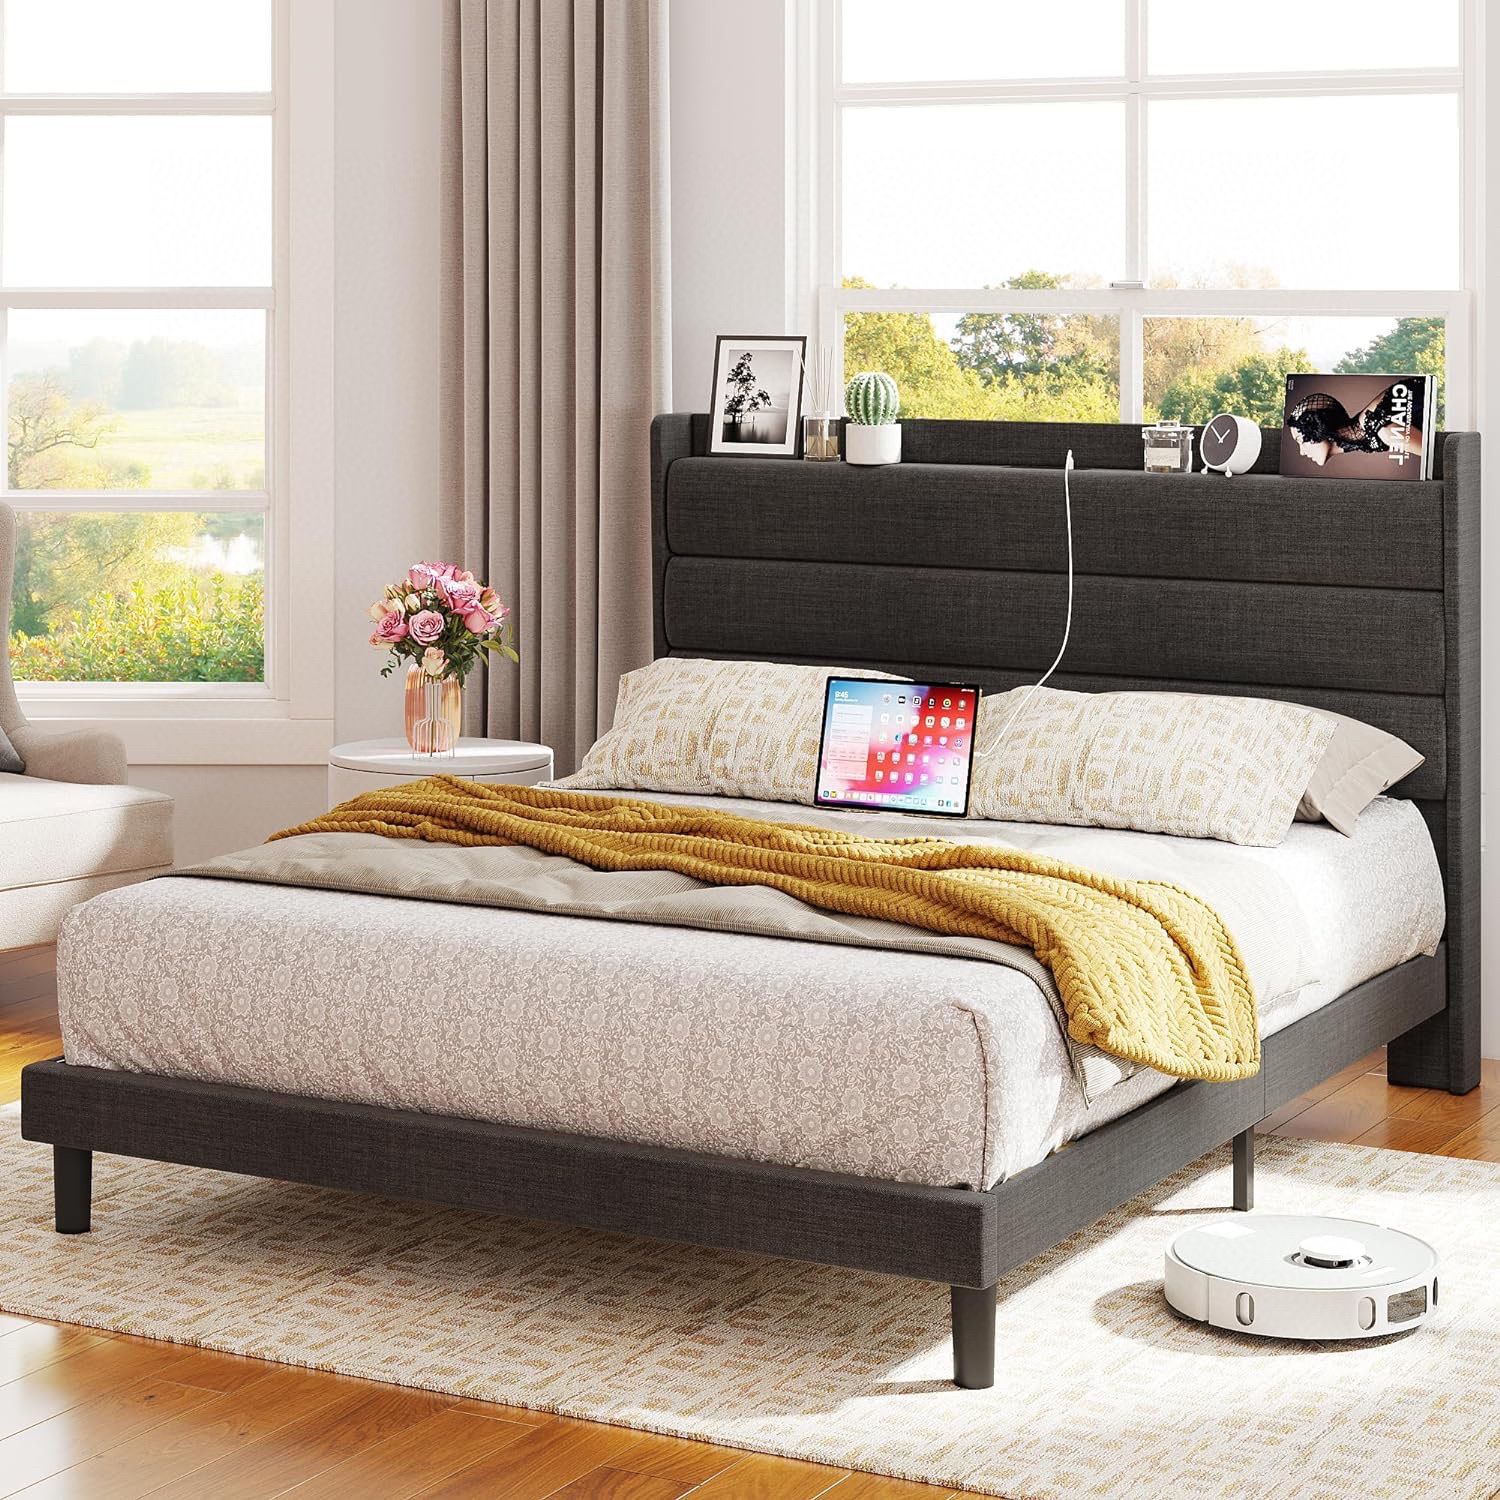 Queen Size Bed Frame, Storage Headboard with Outlets, Sturdy and Stable, No Noise, No Box Springs Needed, Dark Gray